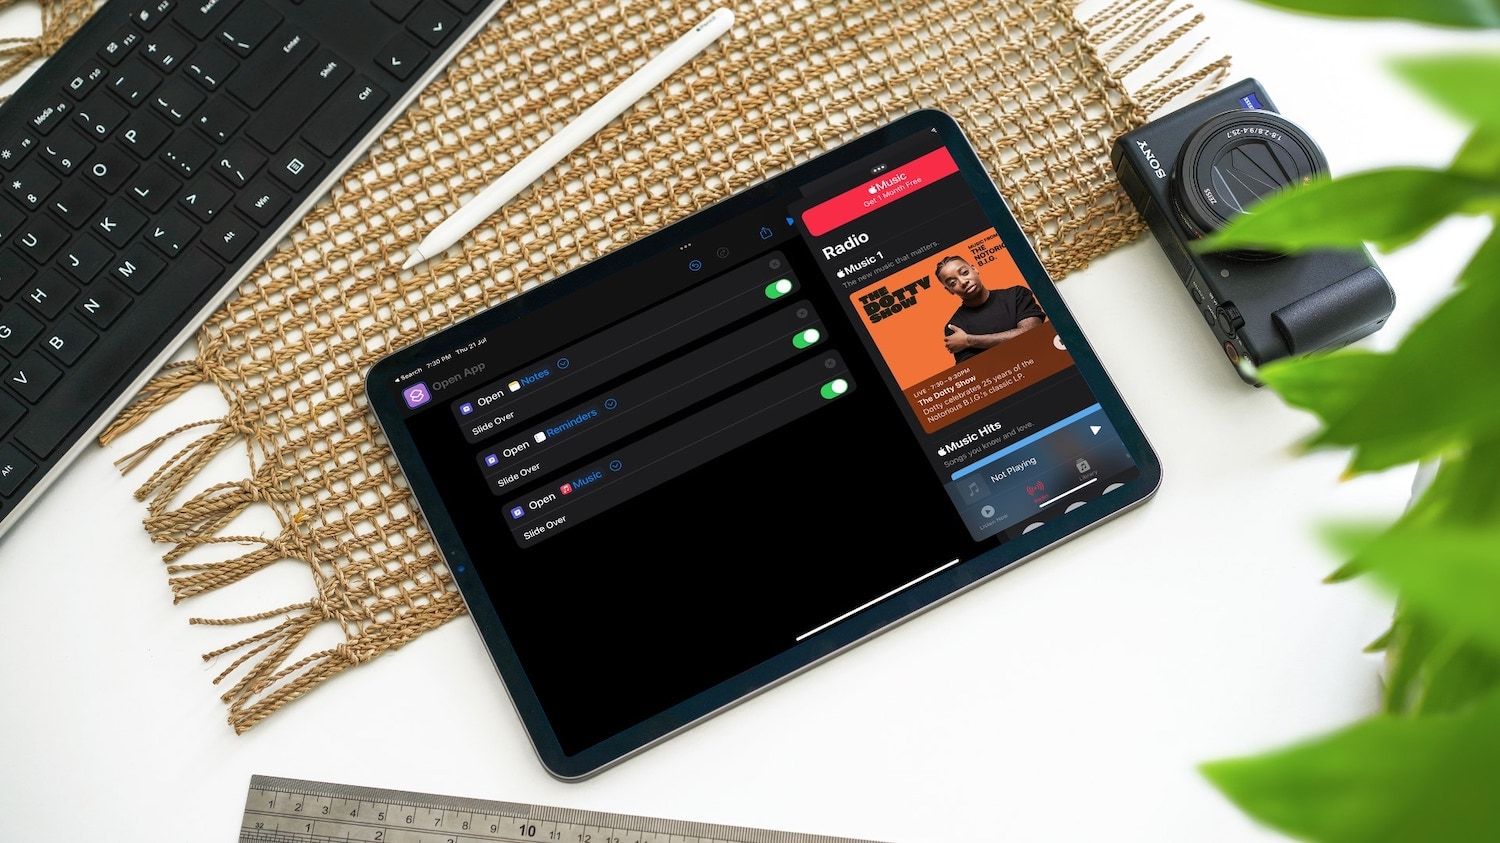 How to Use Shortcuts to Open Multiple Apps in Slide Over Mode on iPad